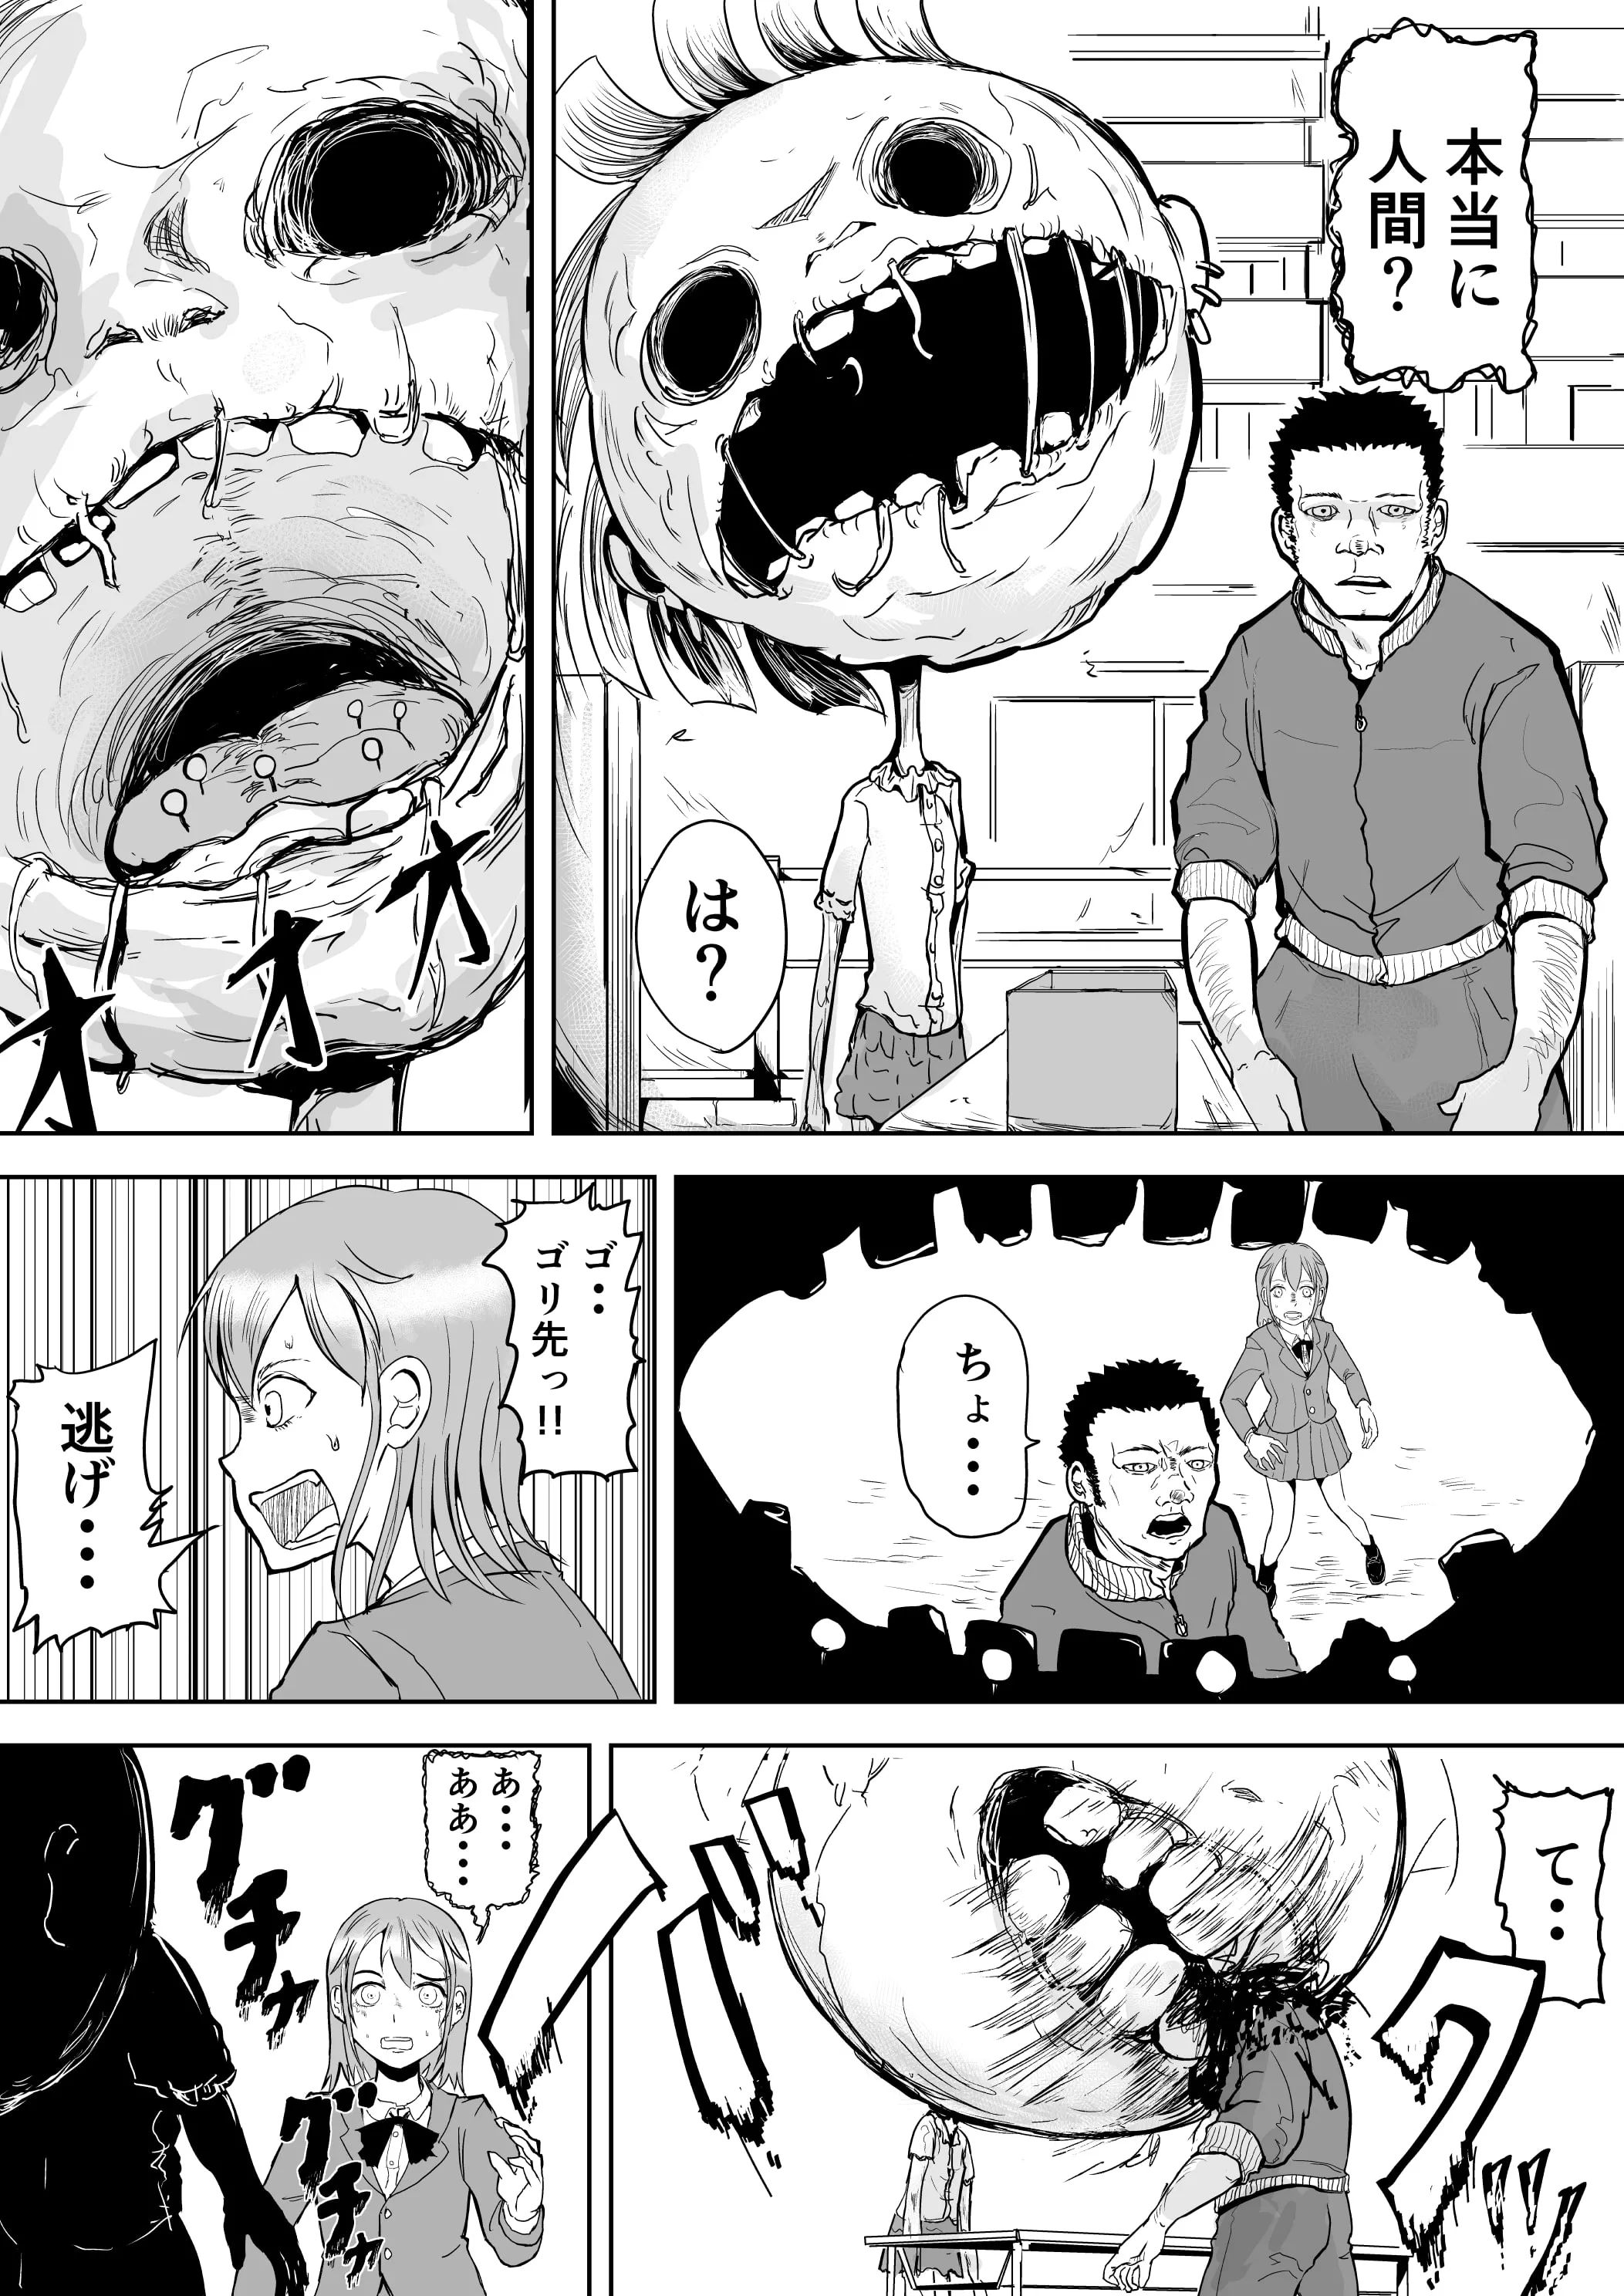 A MANGA ABOUT THE KIND OF PE TEACHER WHO DIES AT THE START OF A SCHOOL HORROR FILM THUMBNAIL